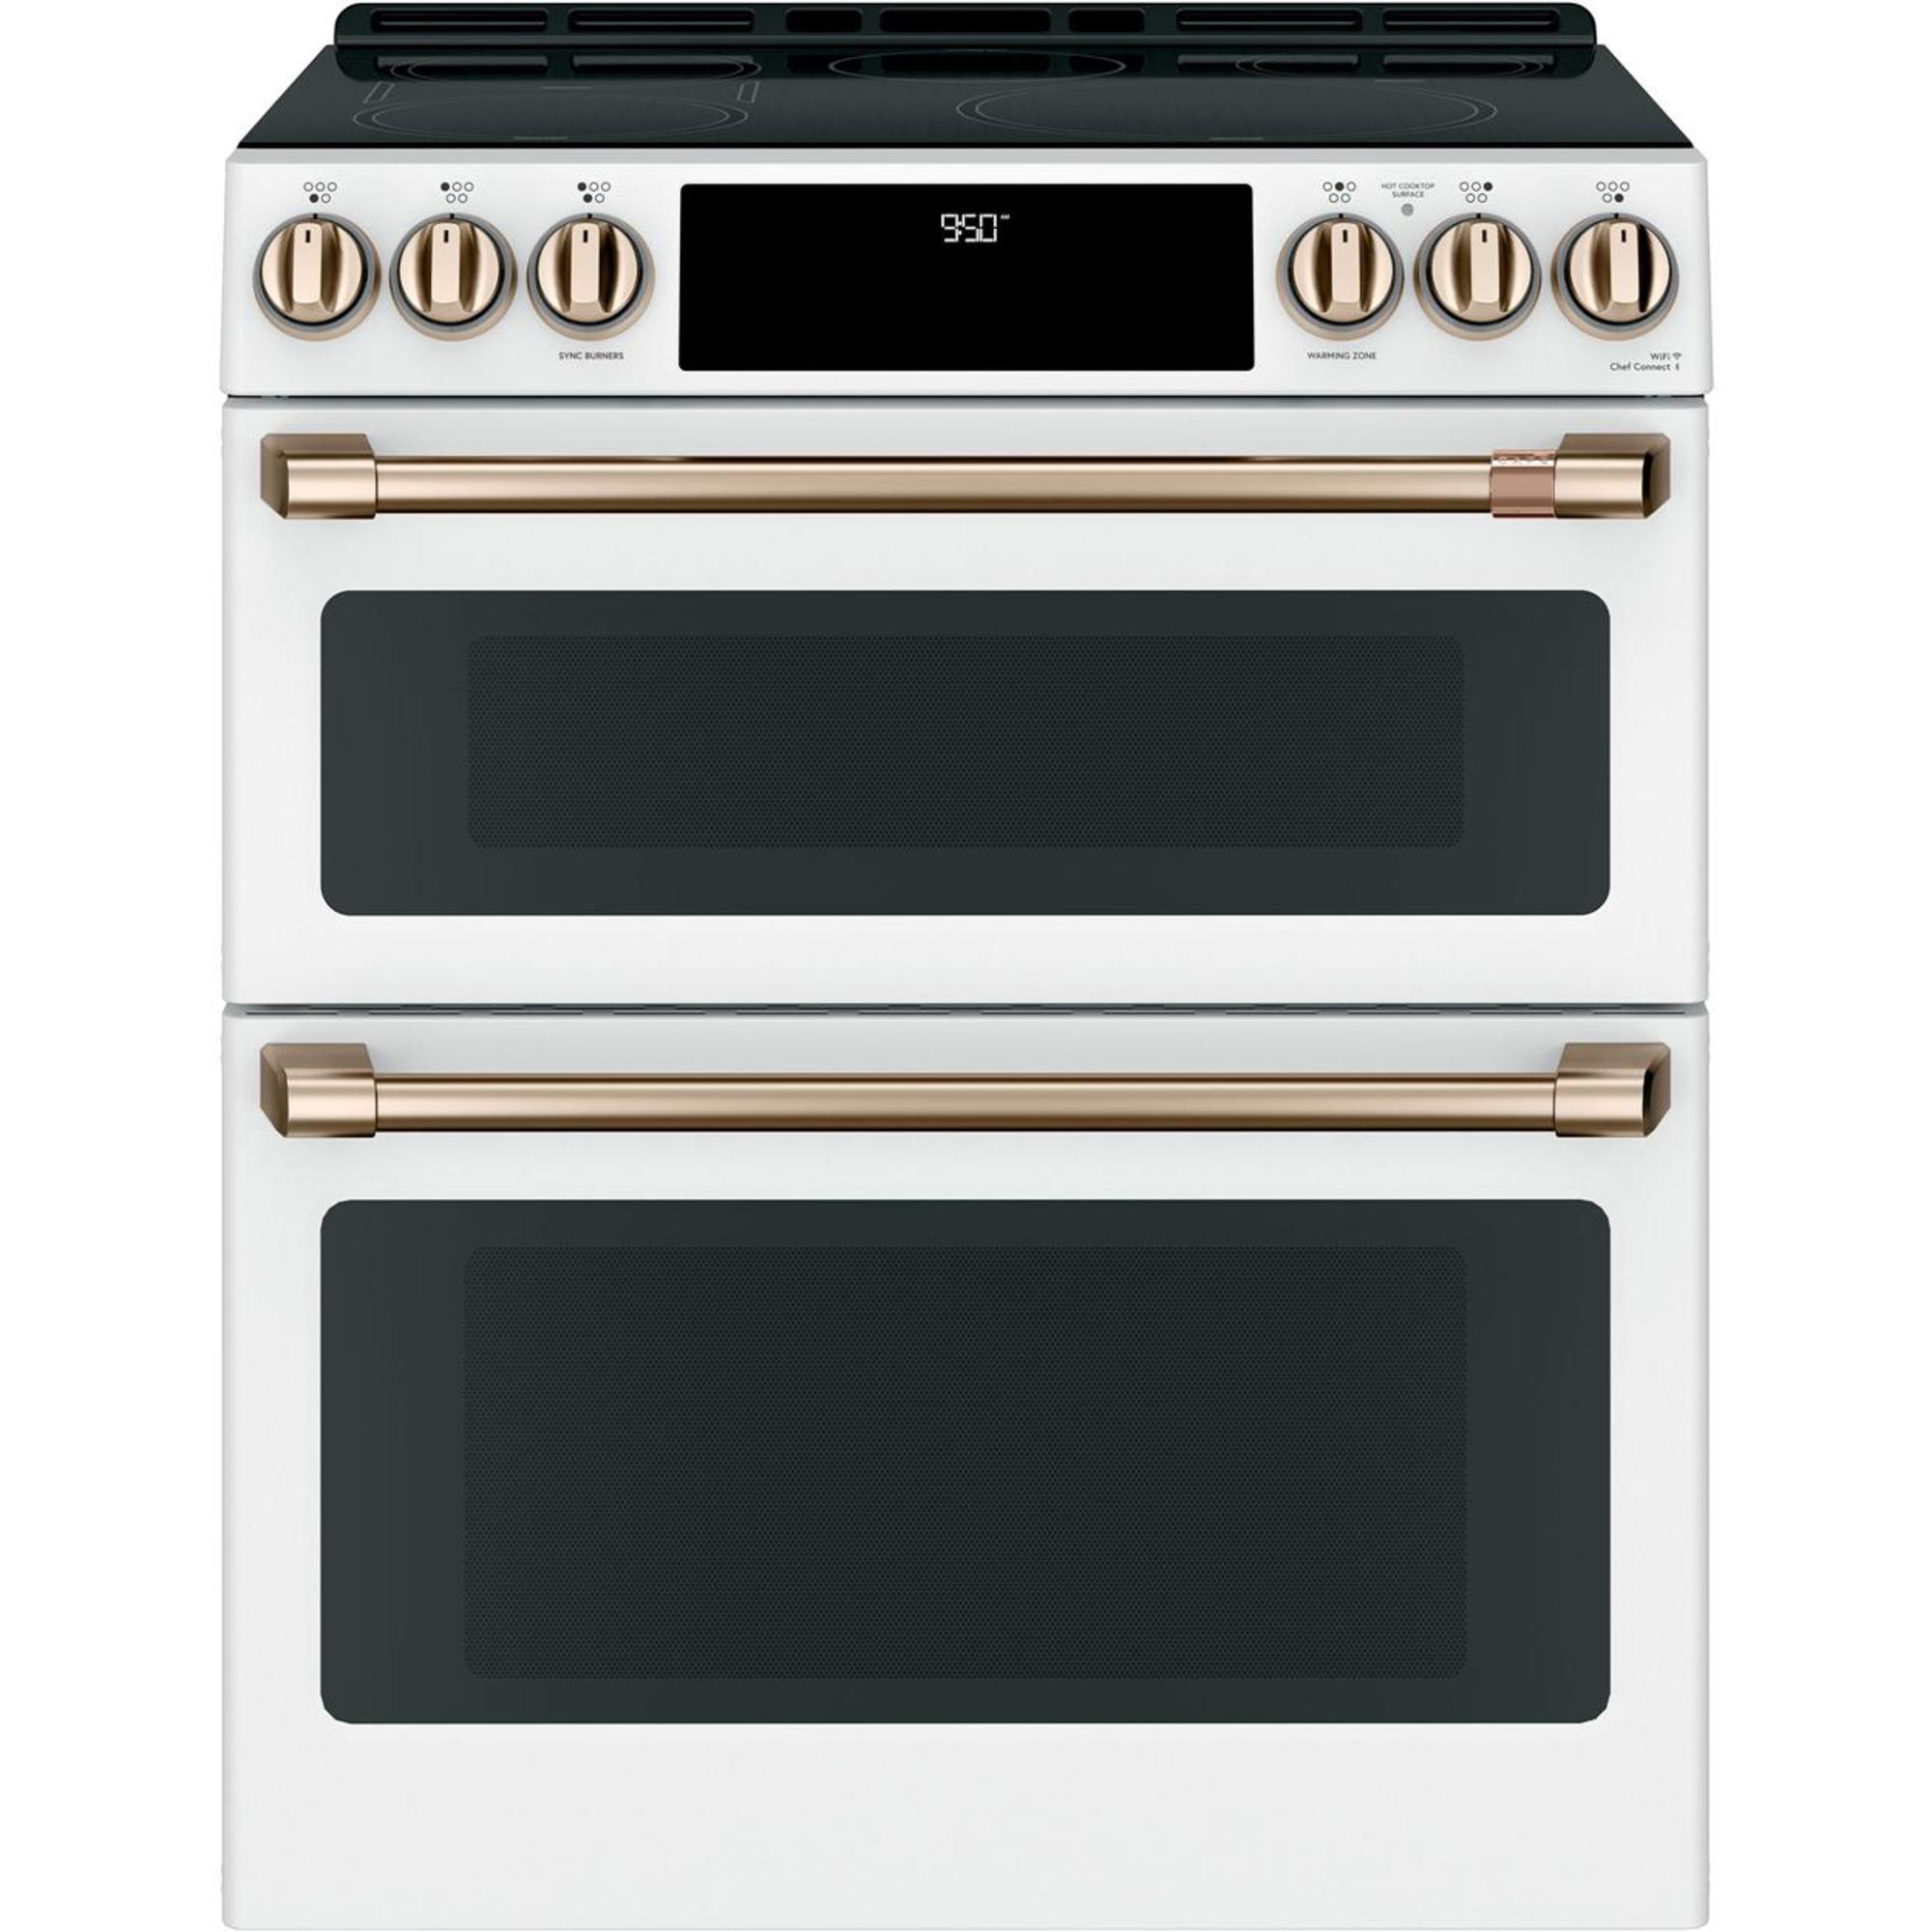 Cafe Café CHS950P4MW2 30" Slide-In Induction and Convection Double Oven Range - Matte White